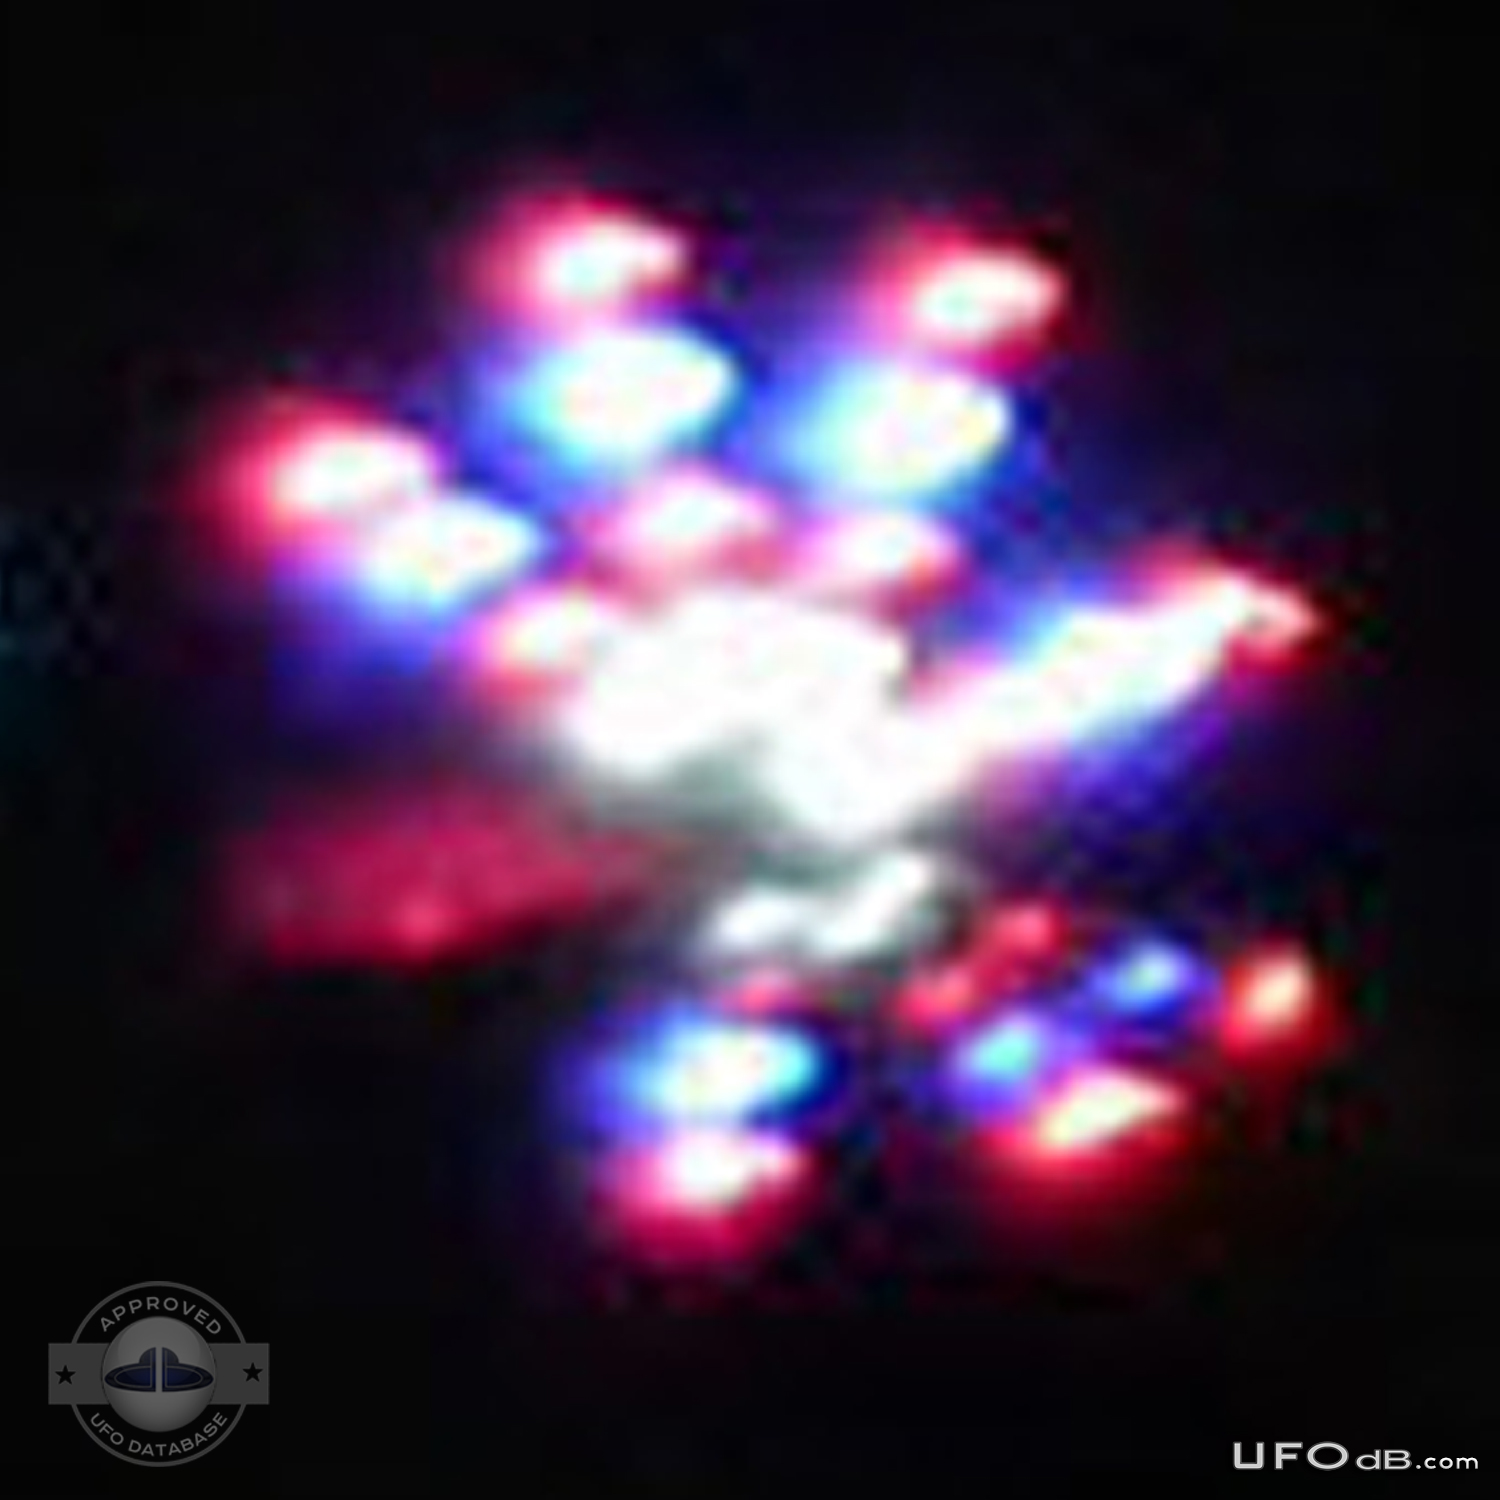 Mr. Shaw photograph a Triangular UFO formation - China - April 30 2011 UFO Picture #281-4